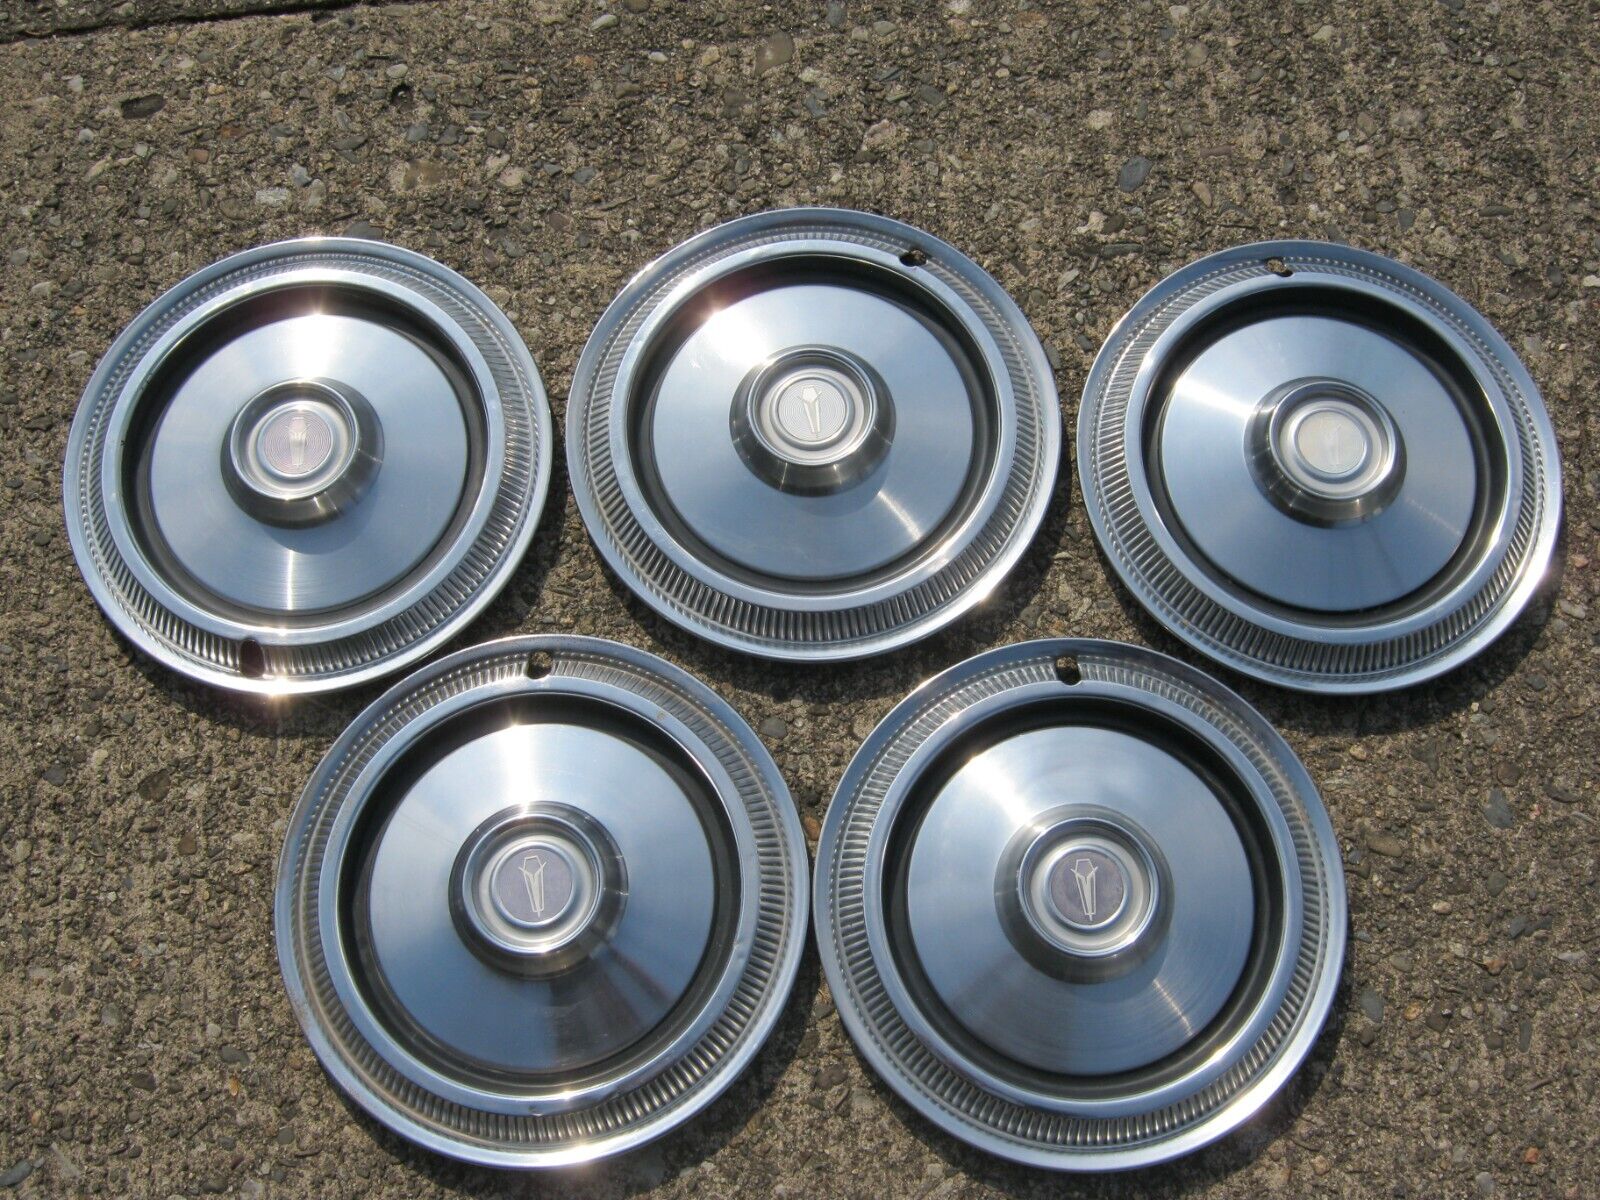 Lot of 5 genuine 1976 to 1980 Plymouth Volare 14 inch hubcaps wheel covers